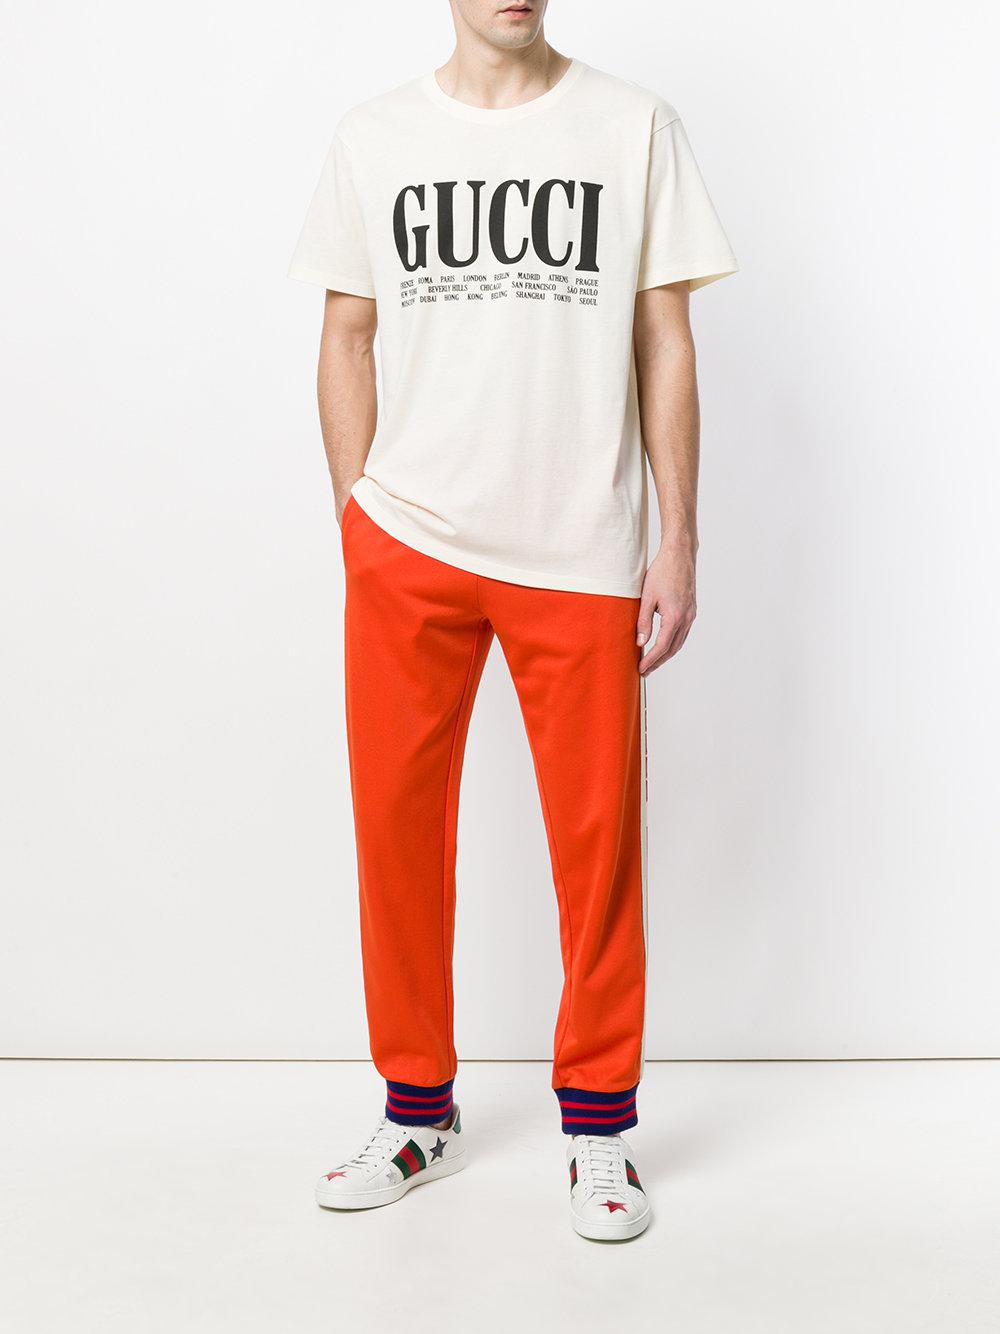 Gucci World Cities Print T-shirt in White for Men | Lyst